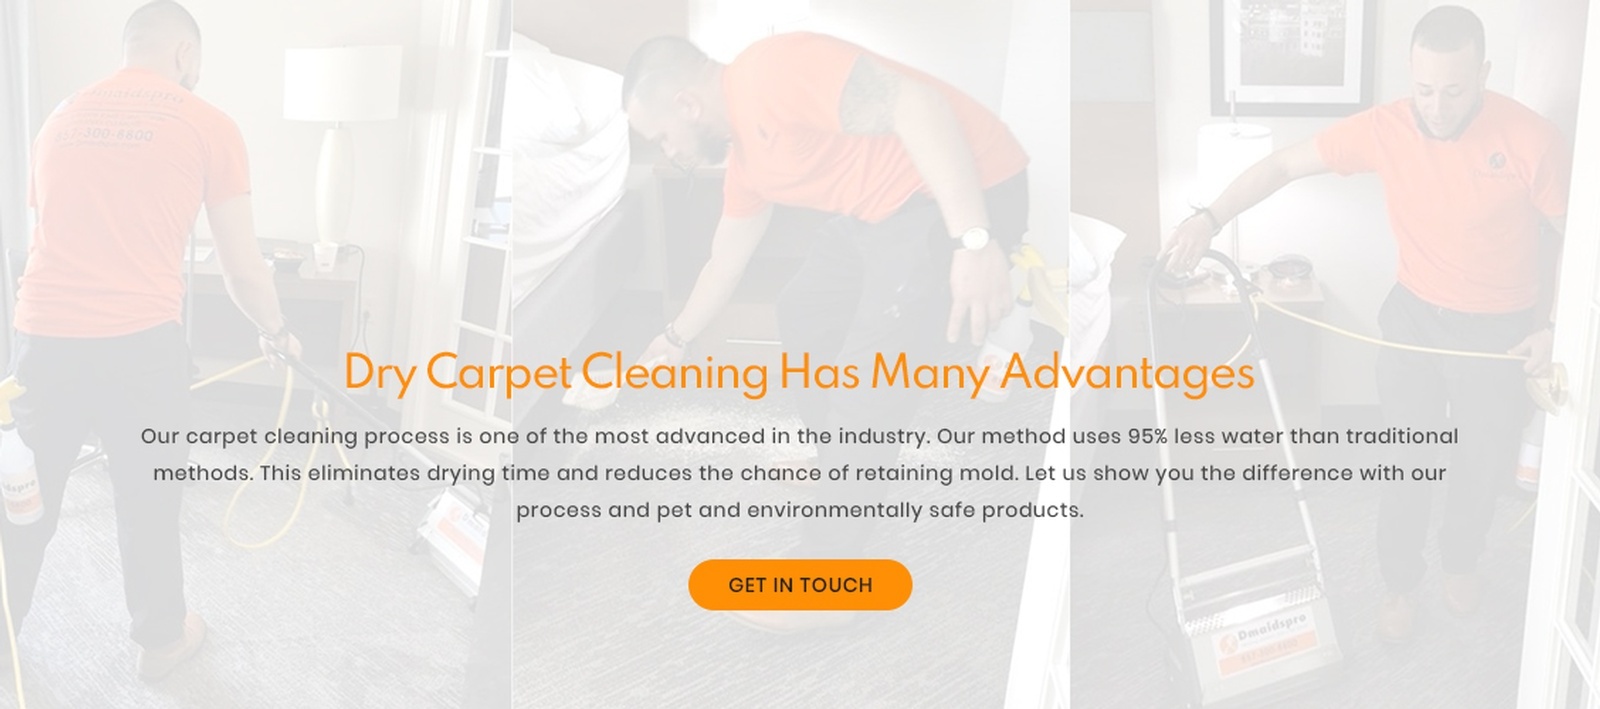 Dry Carpet Cleaning has many advantages - DMaidsPro